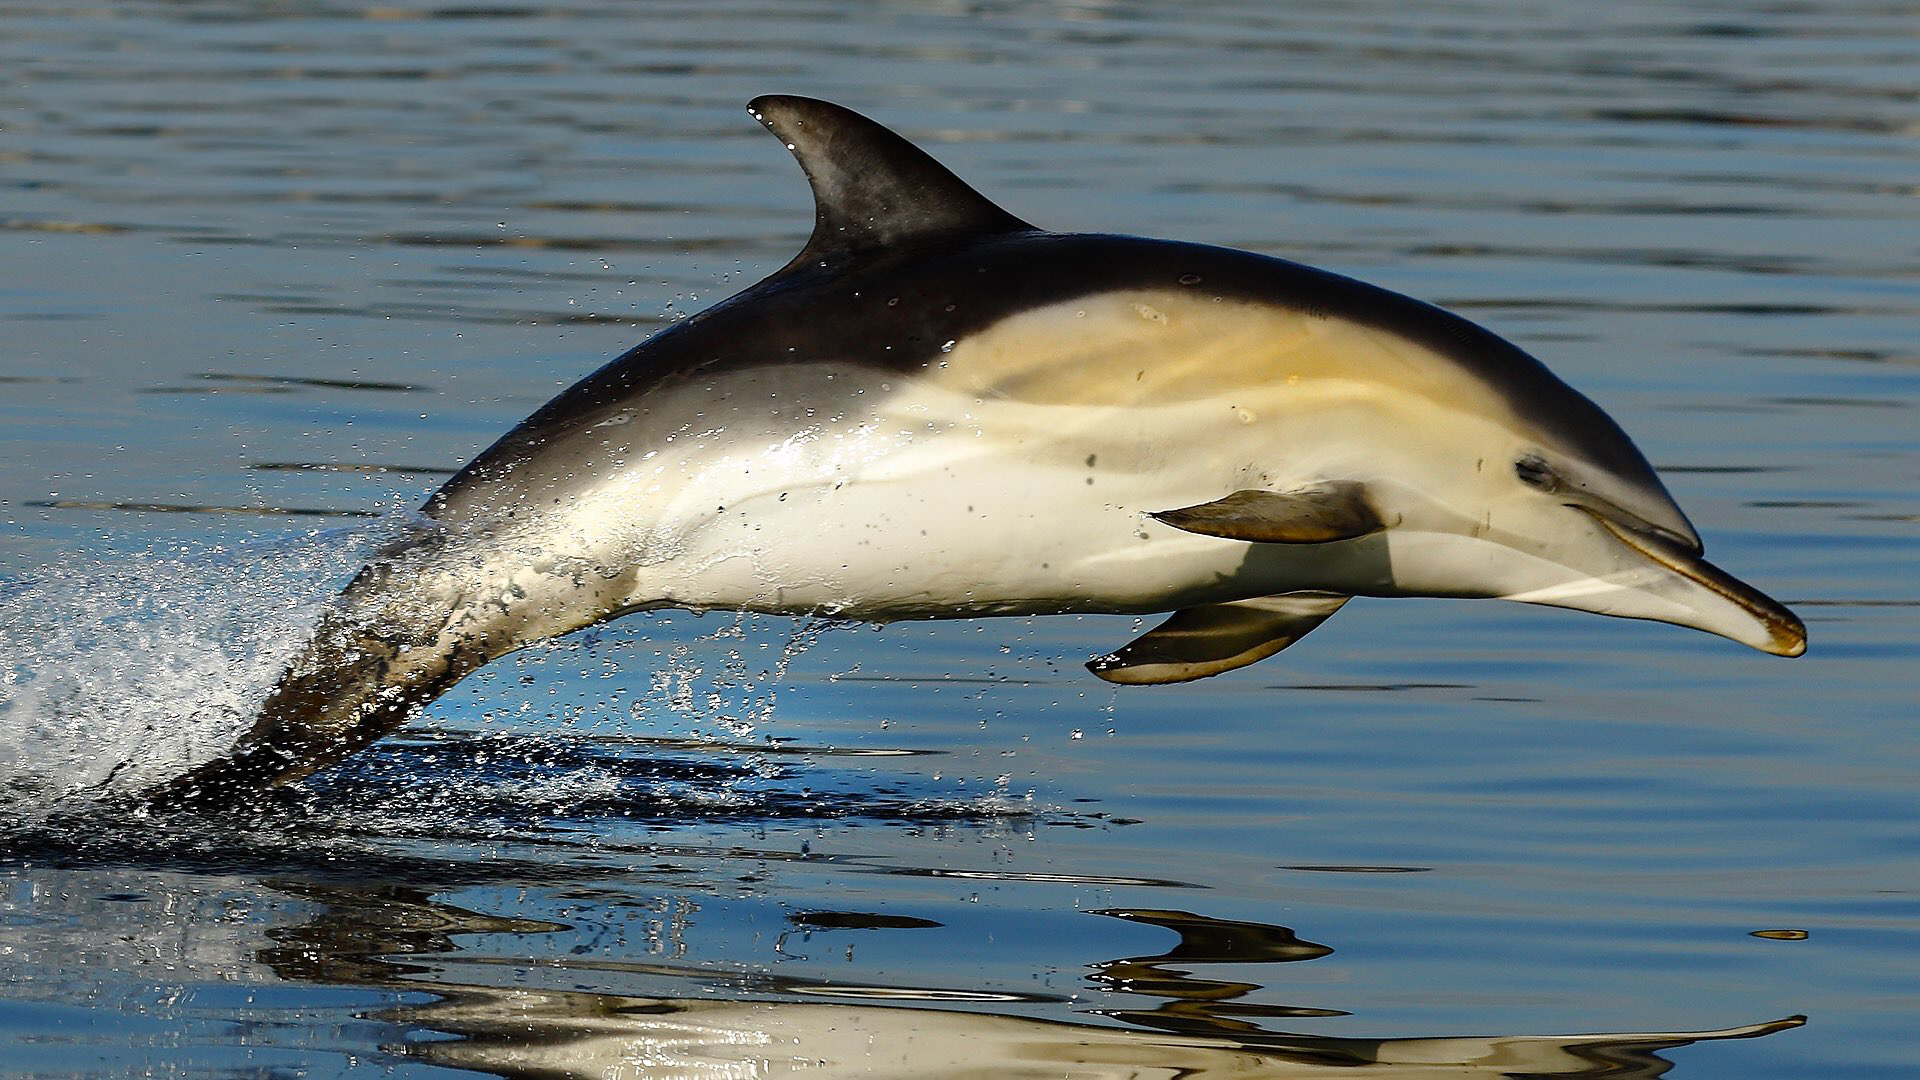 Common dolphin leaping